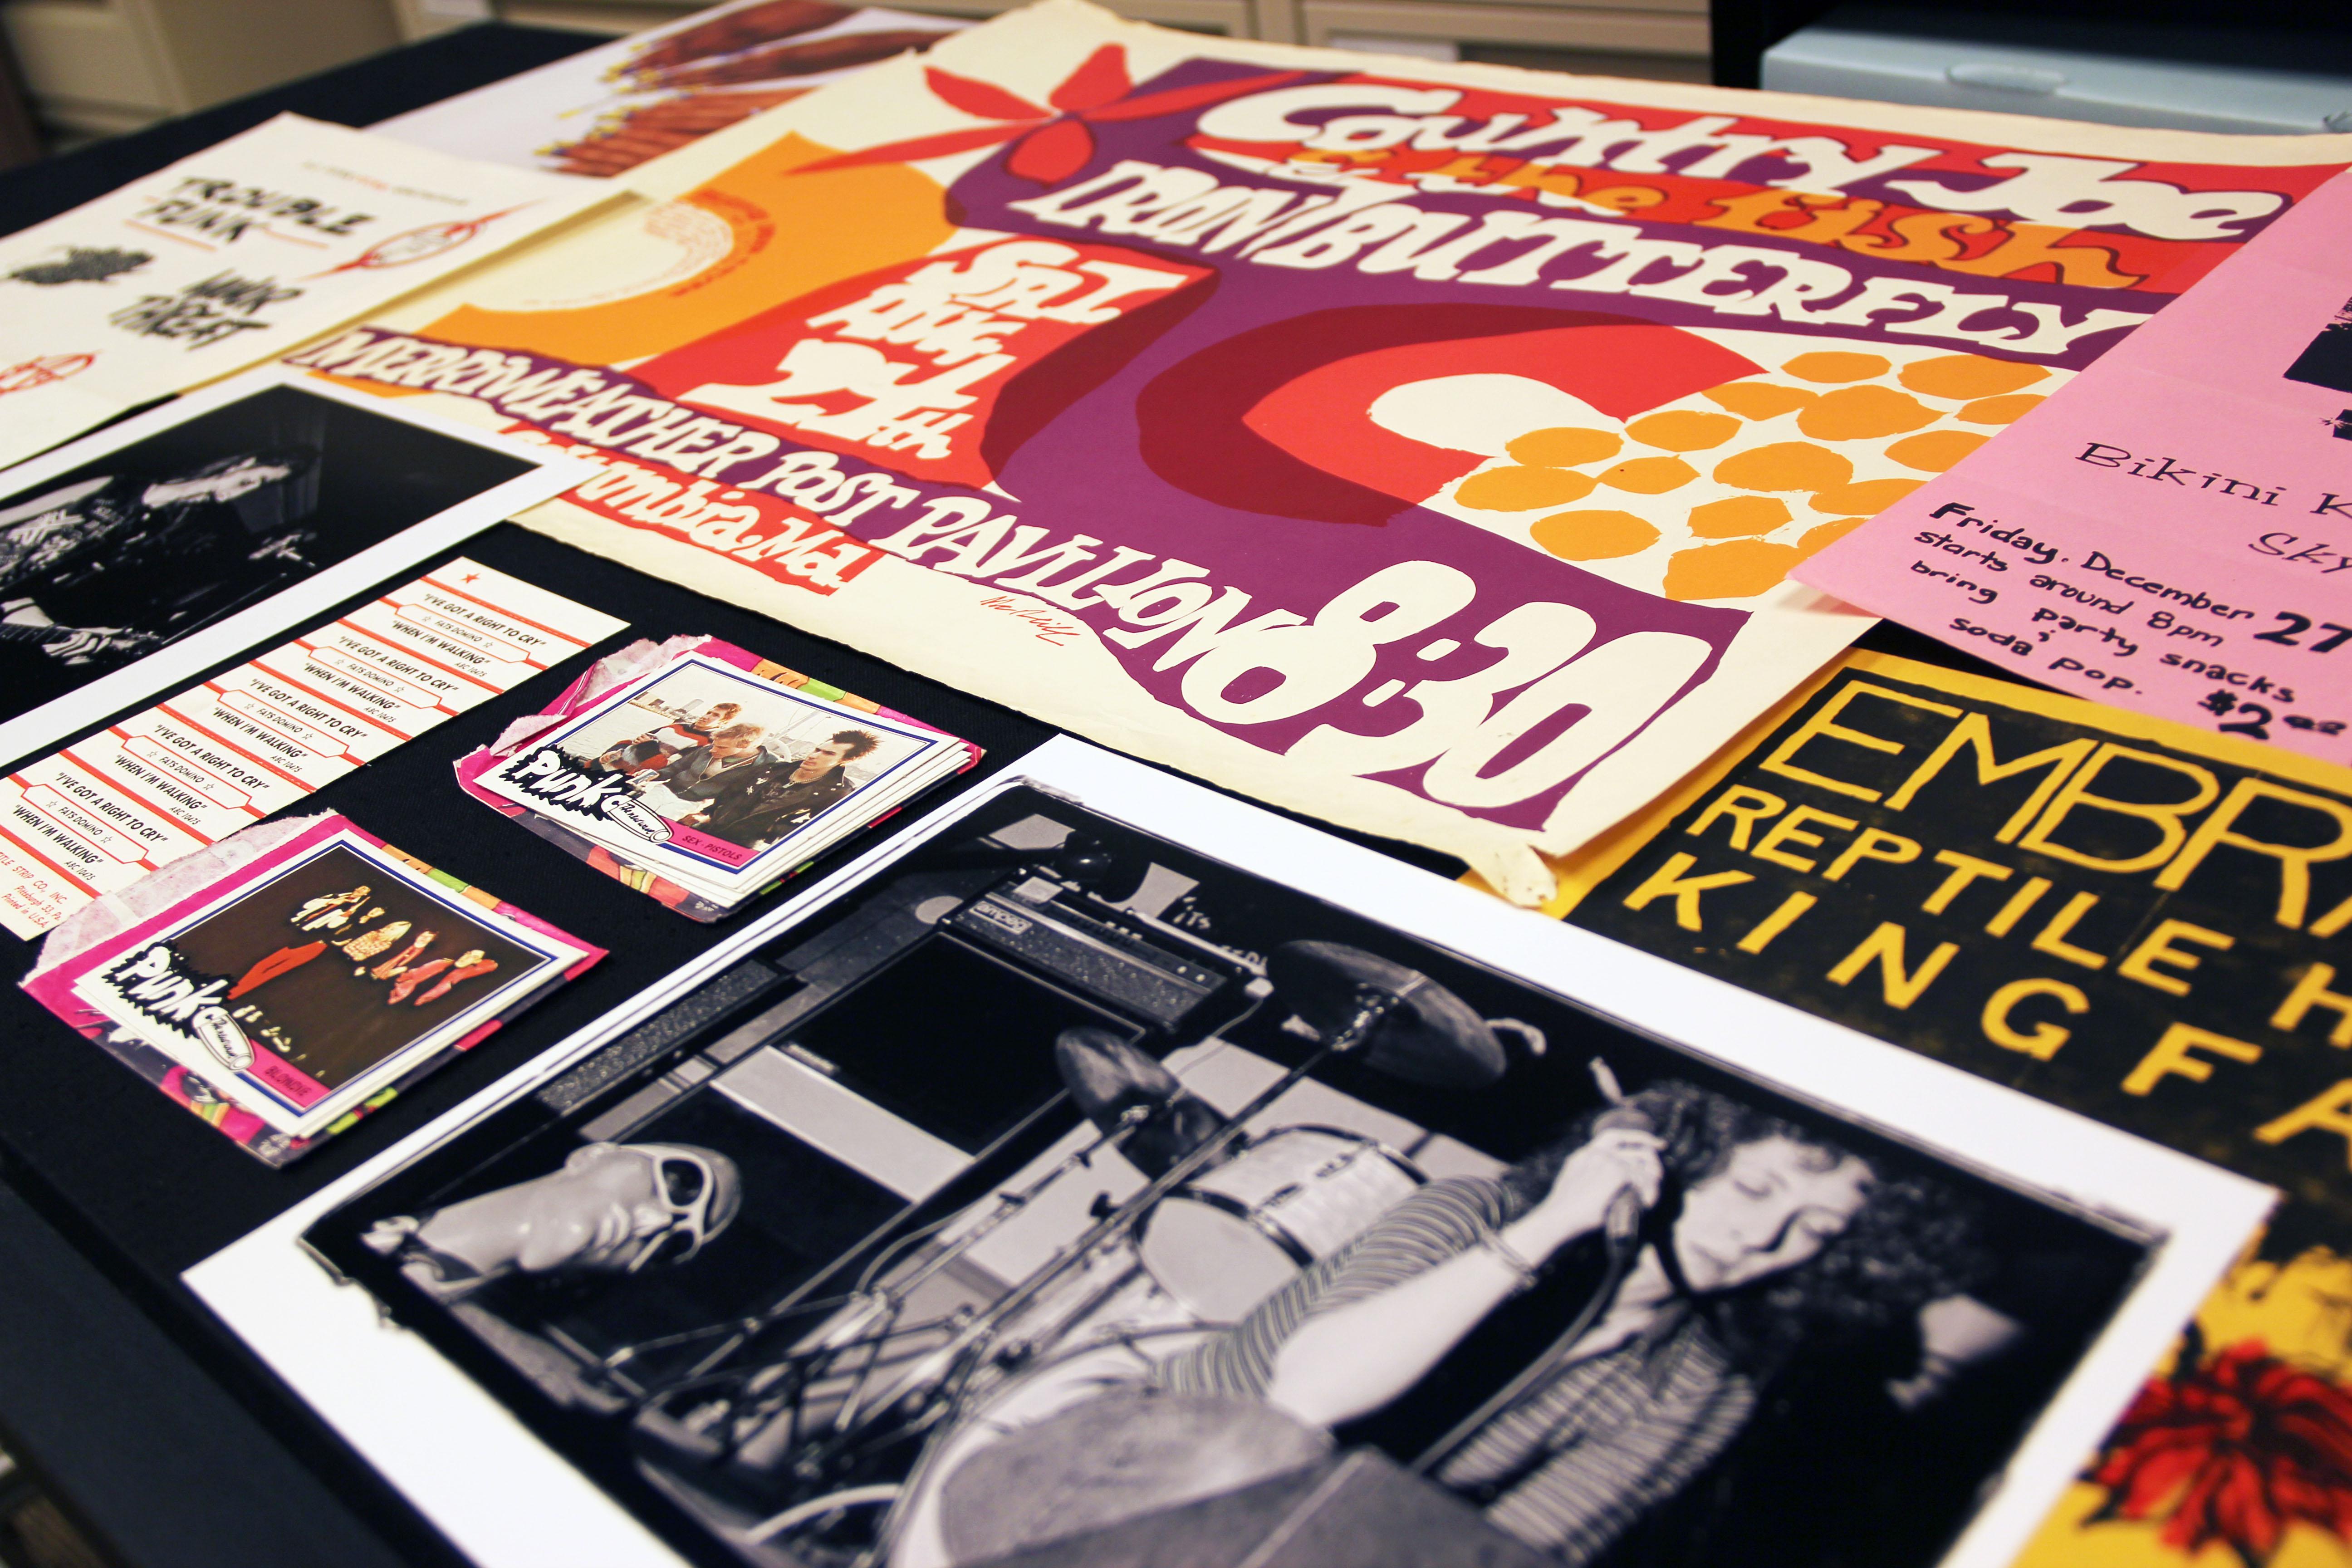 Colorful arrat of posters, photos, and other items from the popular music collections at SCPA